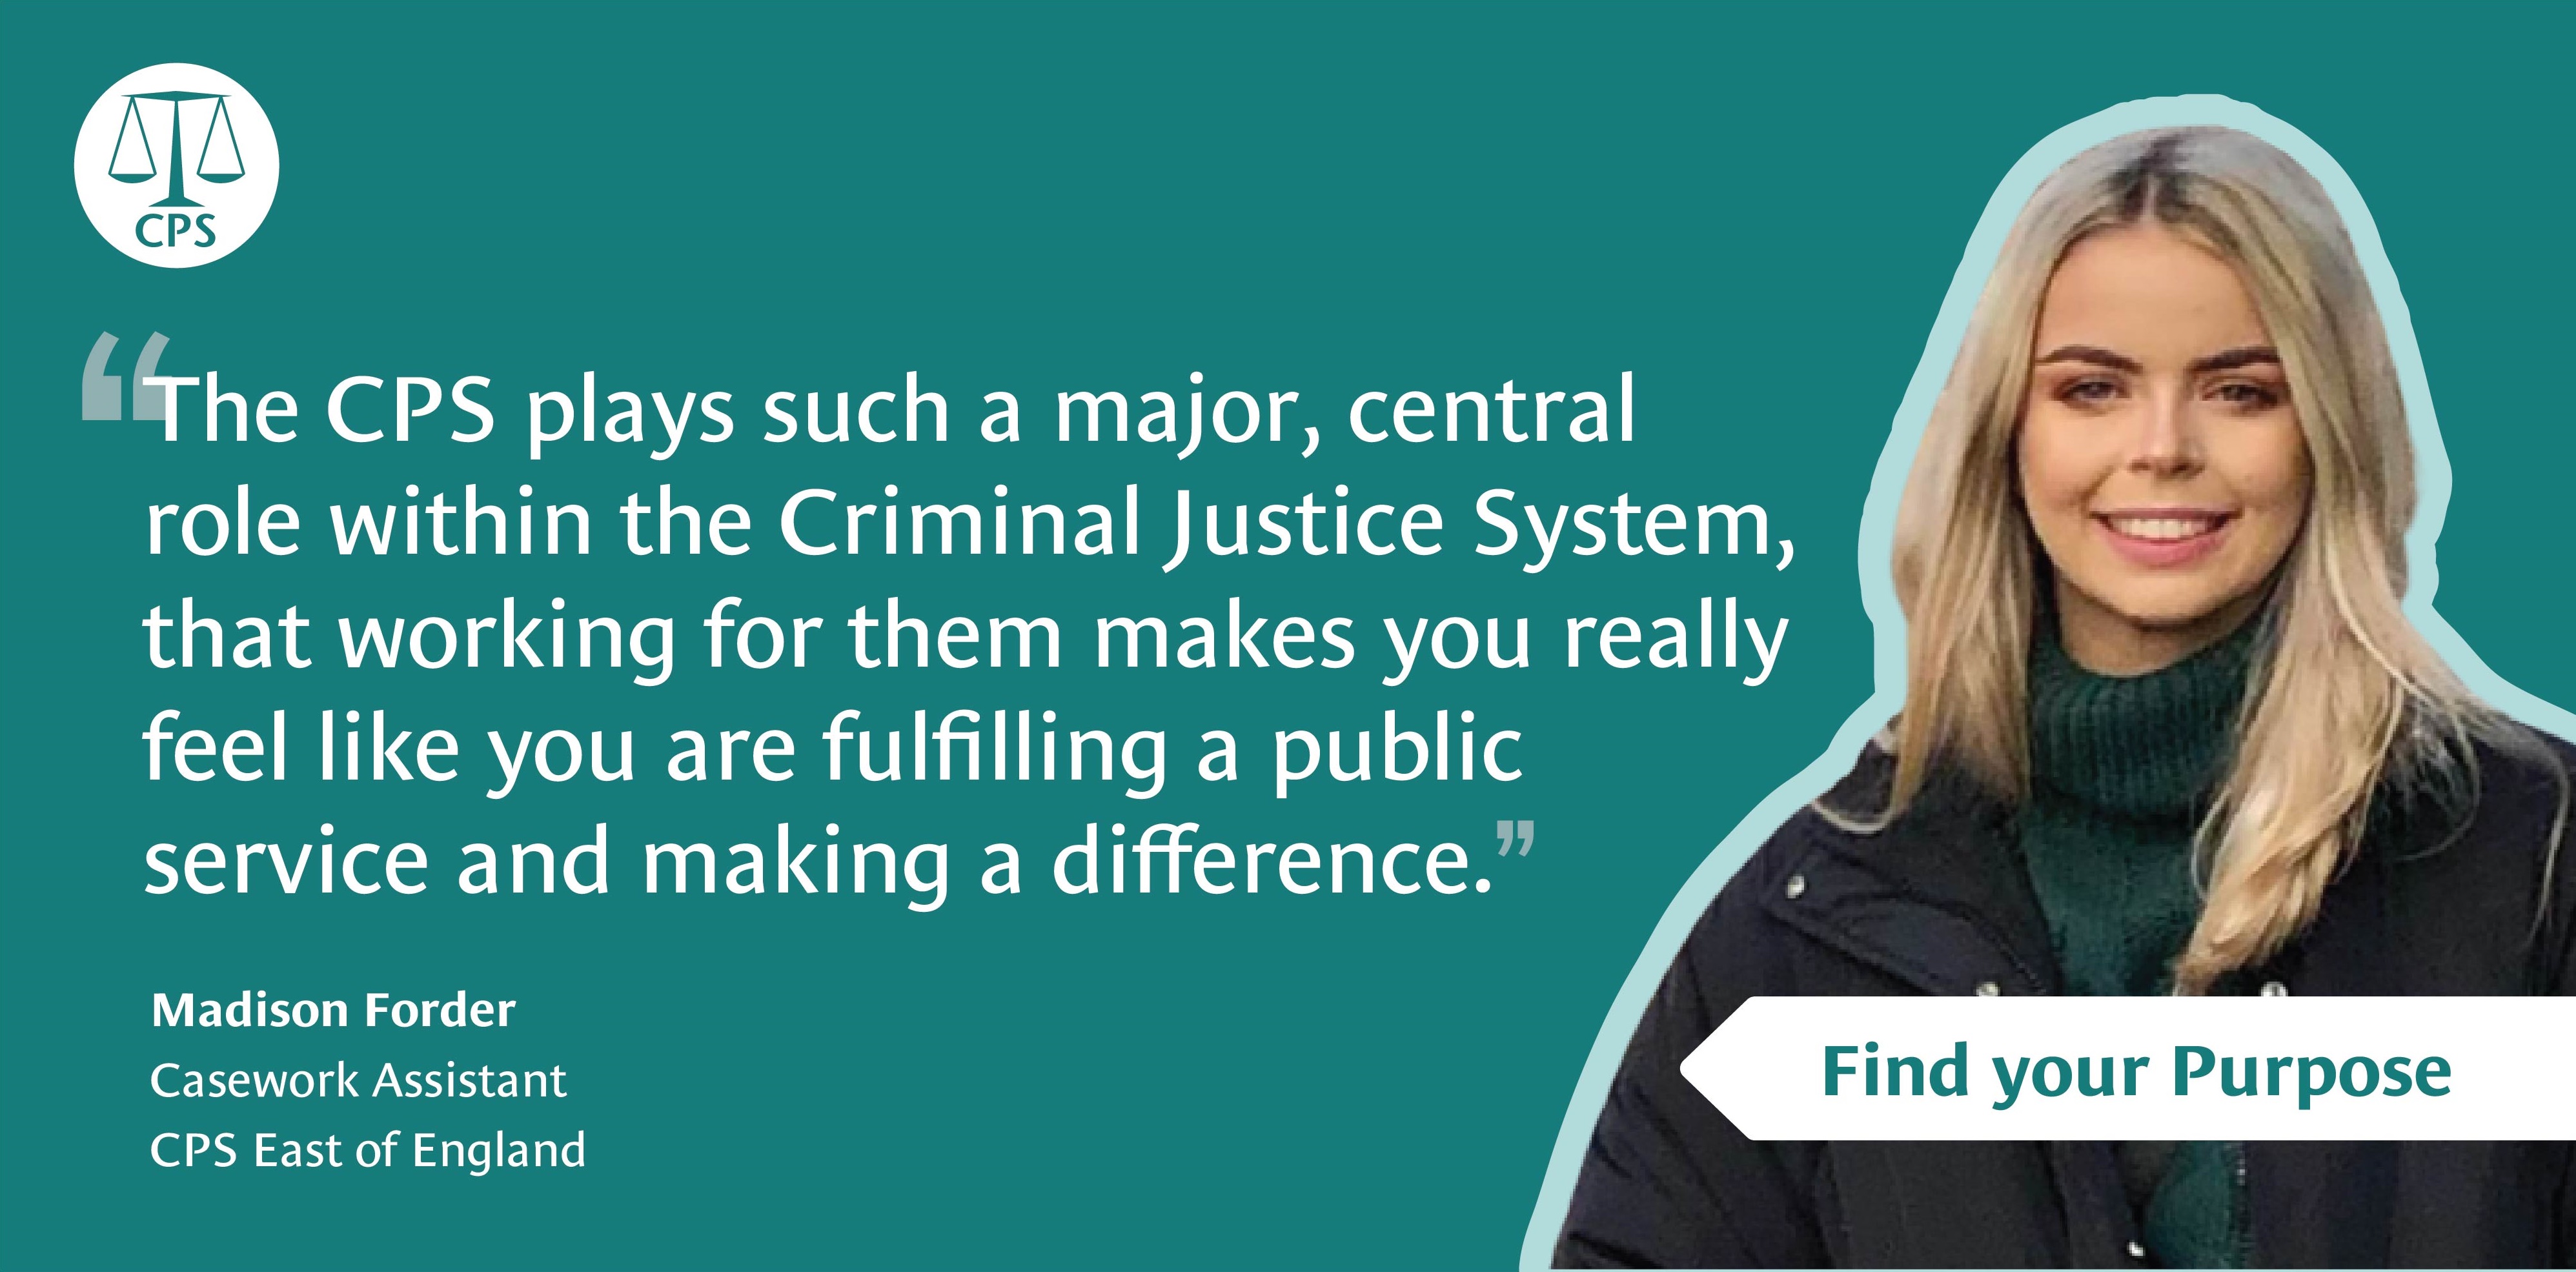 'The CPS plays such a major, central role within the Criminal Justice System that working for them makes you really feel like you are fulfilling a public service and making a difference.' - Madison Forder, Casework Assistant, CPS East of England. The Crown Prosecution Service: Find your purpose.